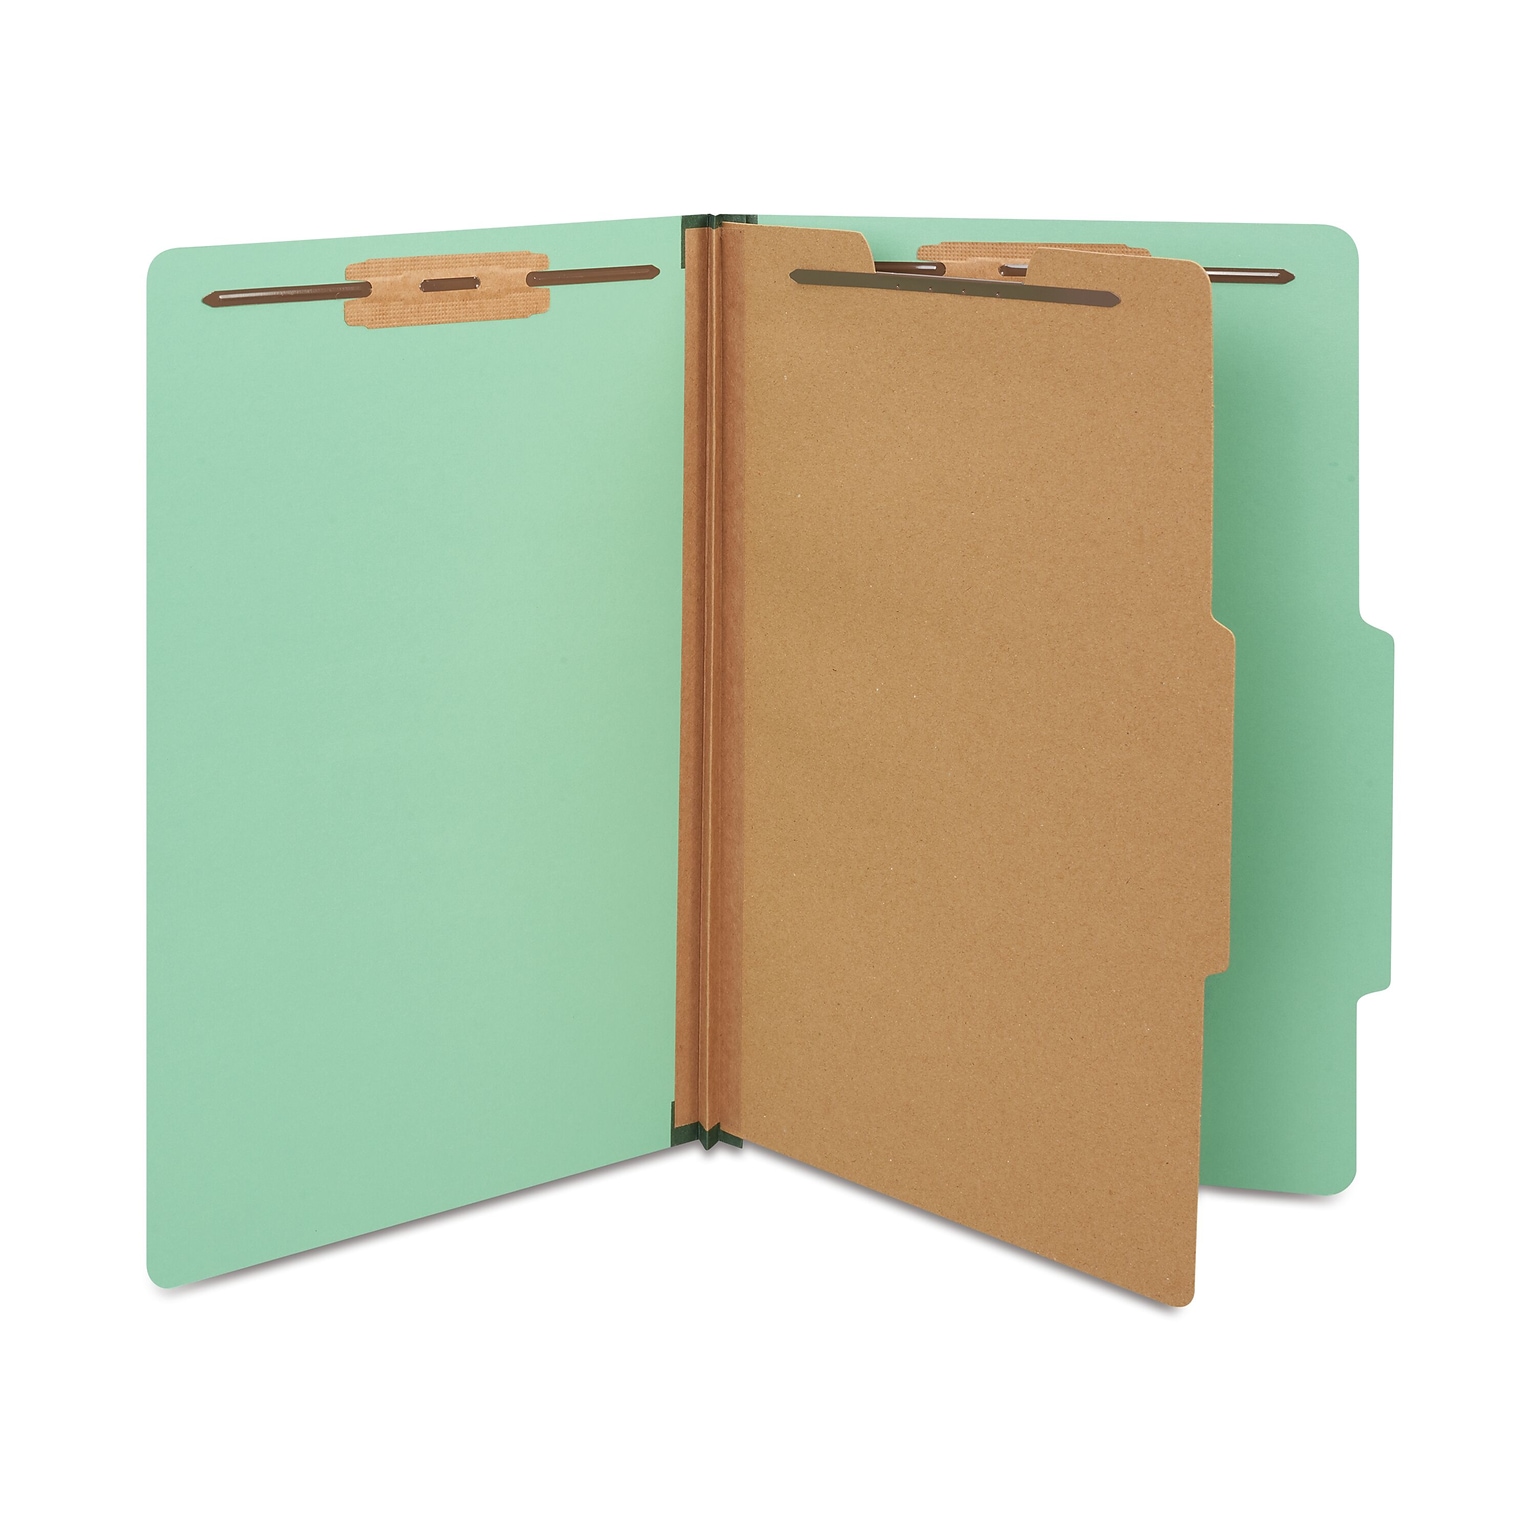 Staples 60% Recycled Pressboard Classification Folder, 1-Divider, 1.75 Expansion, Legal Size, Light Green, 20/Box